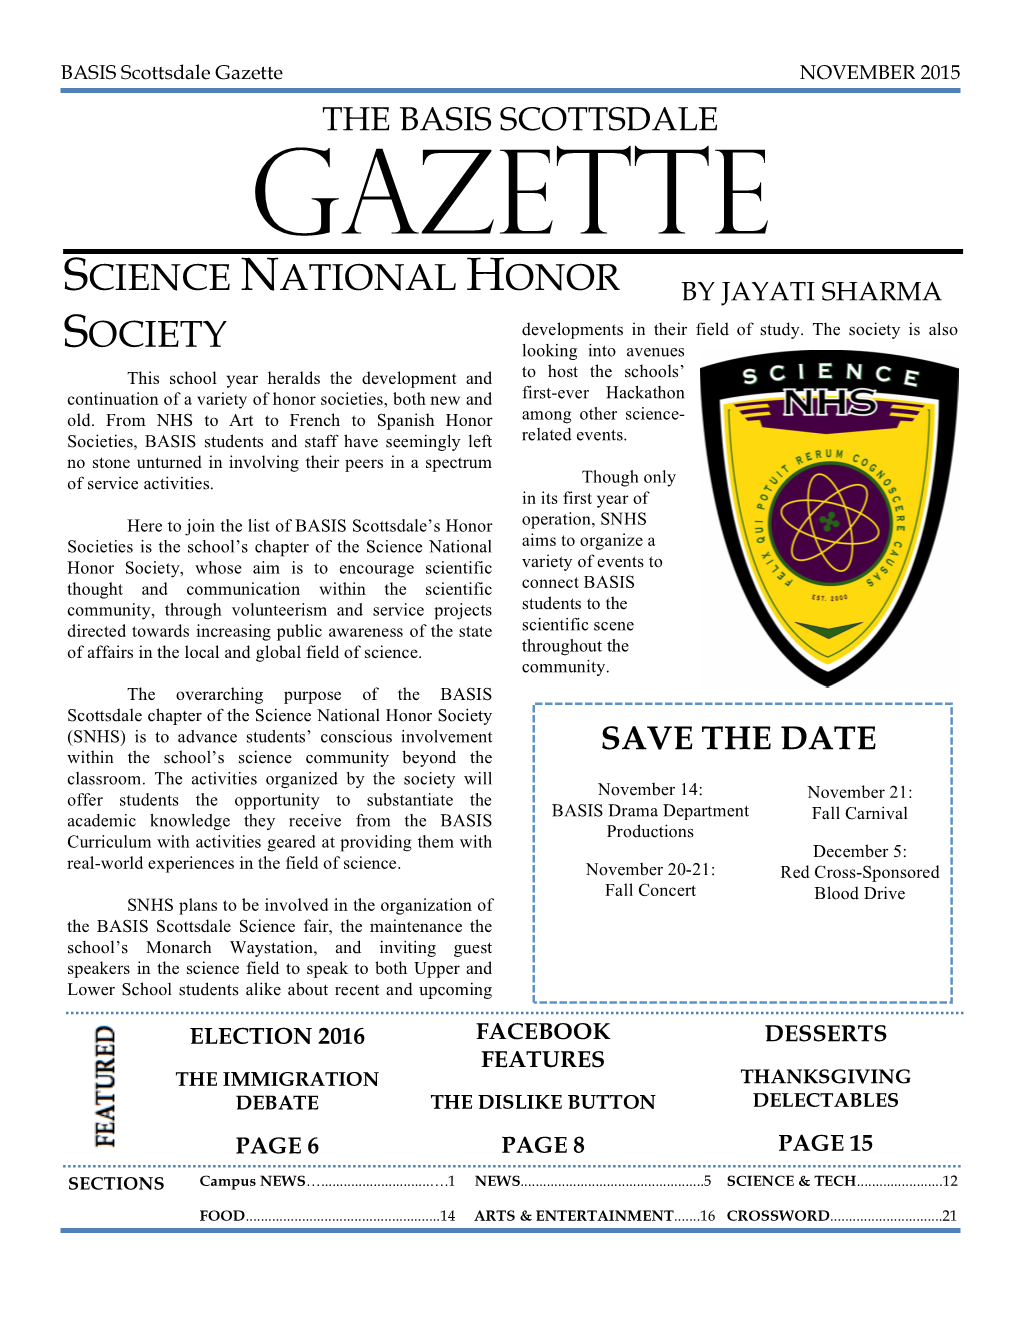 Science National Honor Society (SNHS) Is to Advance Students’ Conscious Involvement Within the School’S Science Community Beyond the SAVE the DATE Classroom